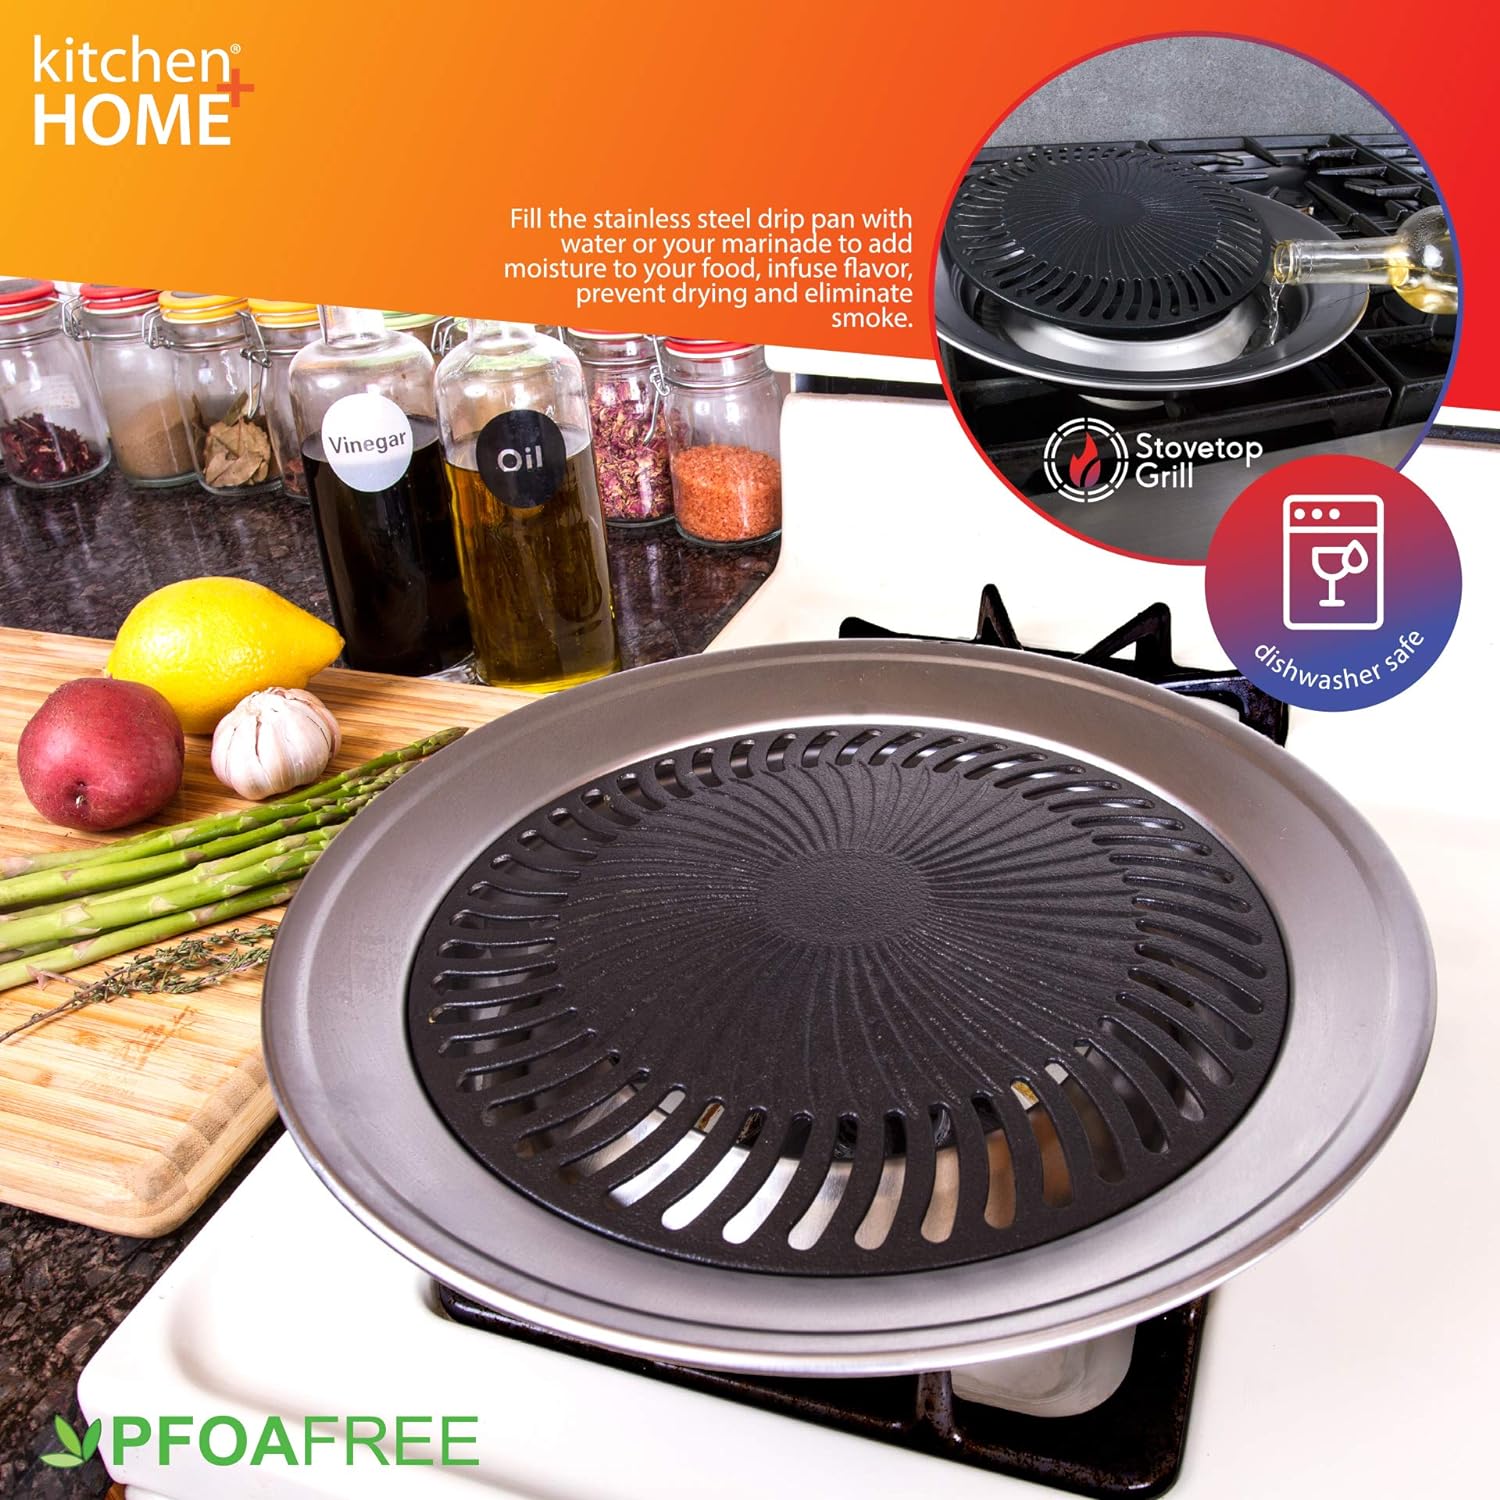 Smokeless Non-Stick Barbecue Grill for Home - EAST WEST MART